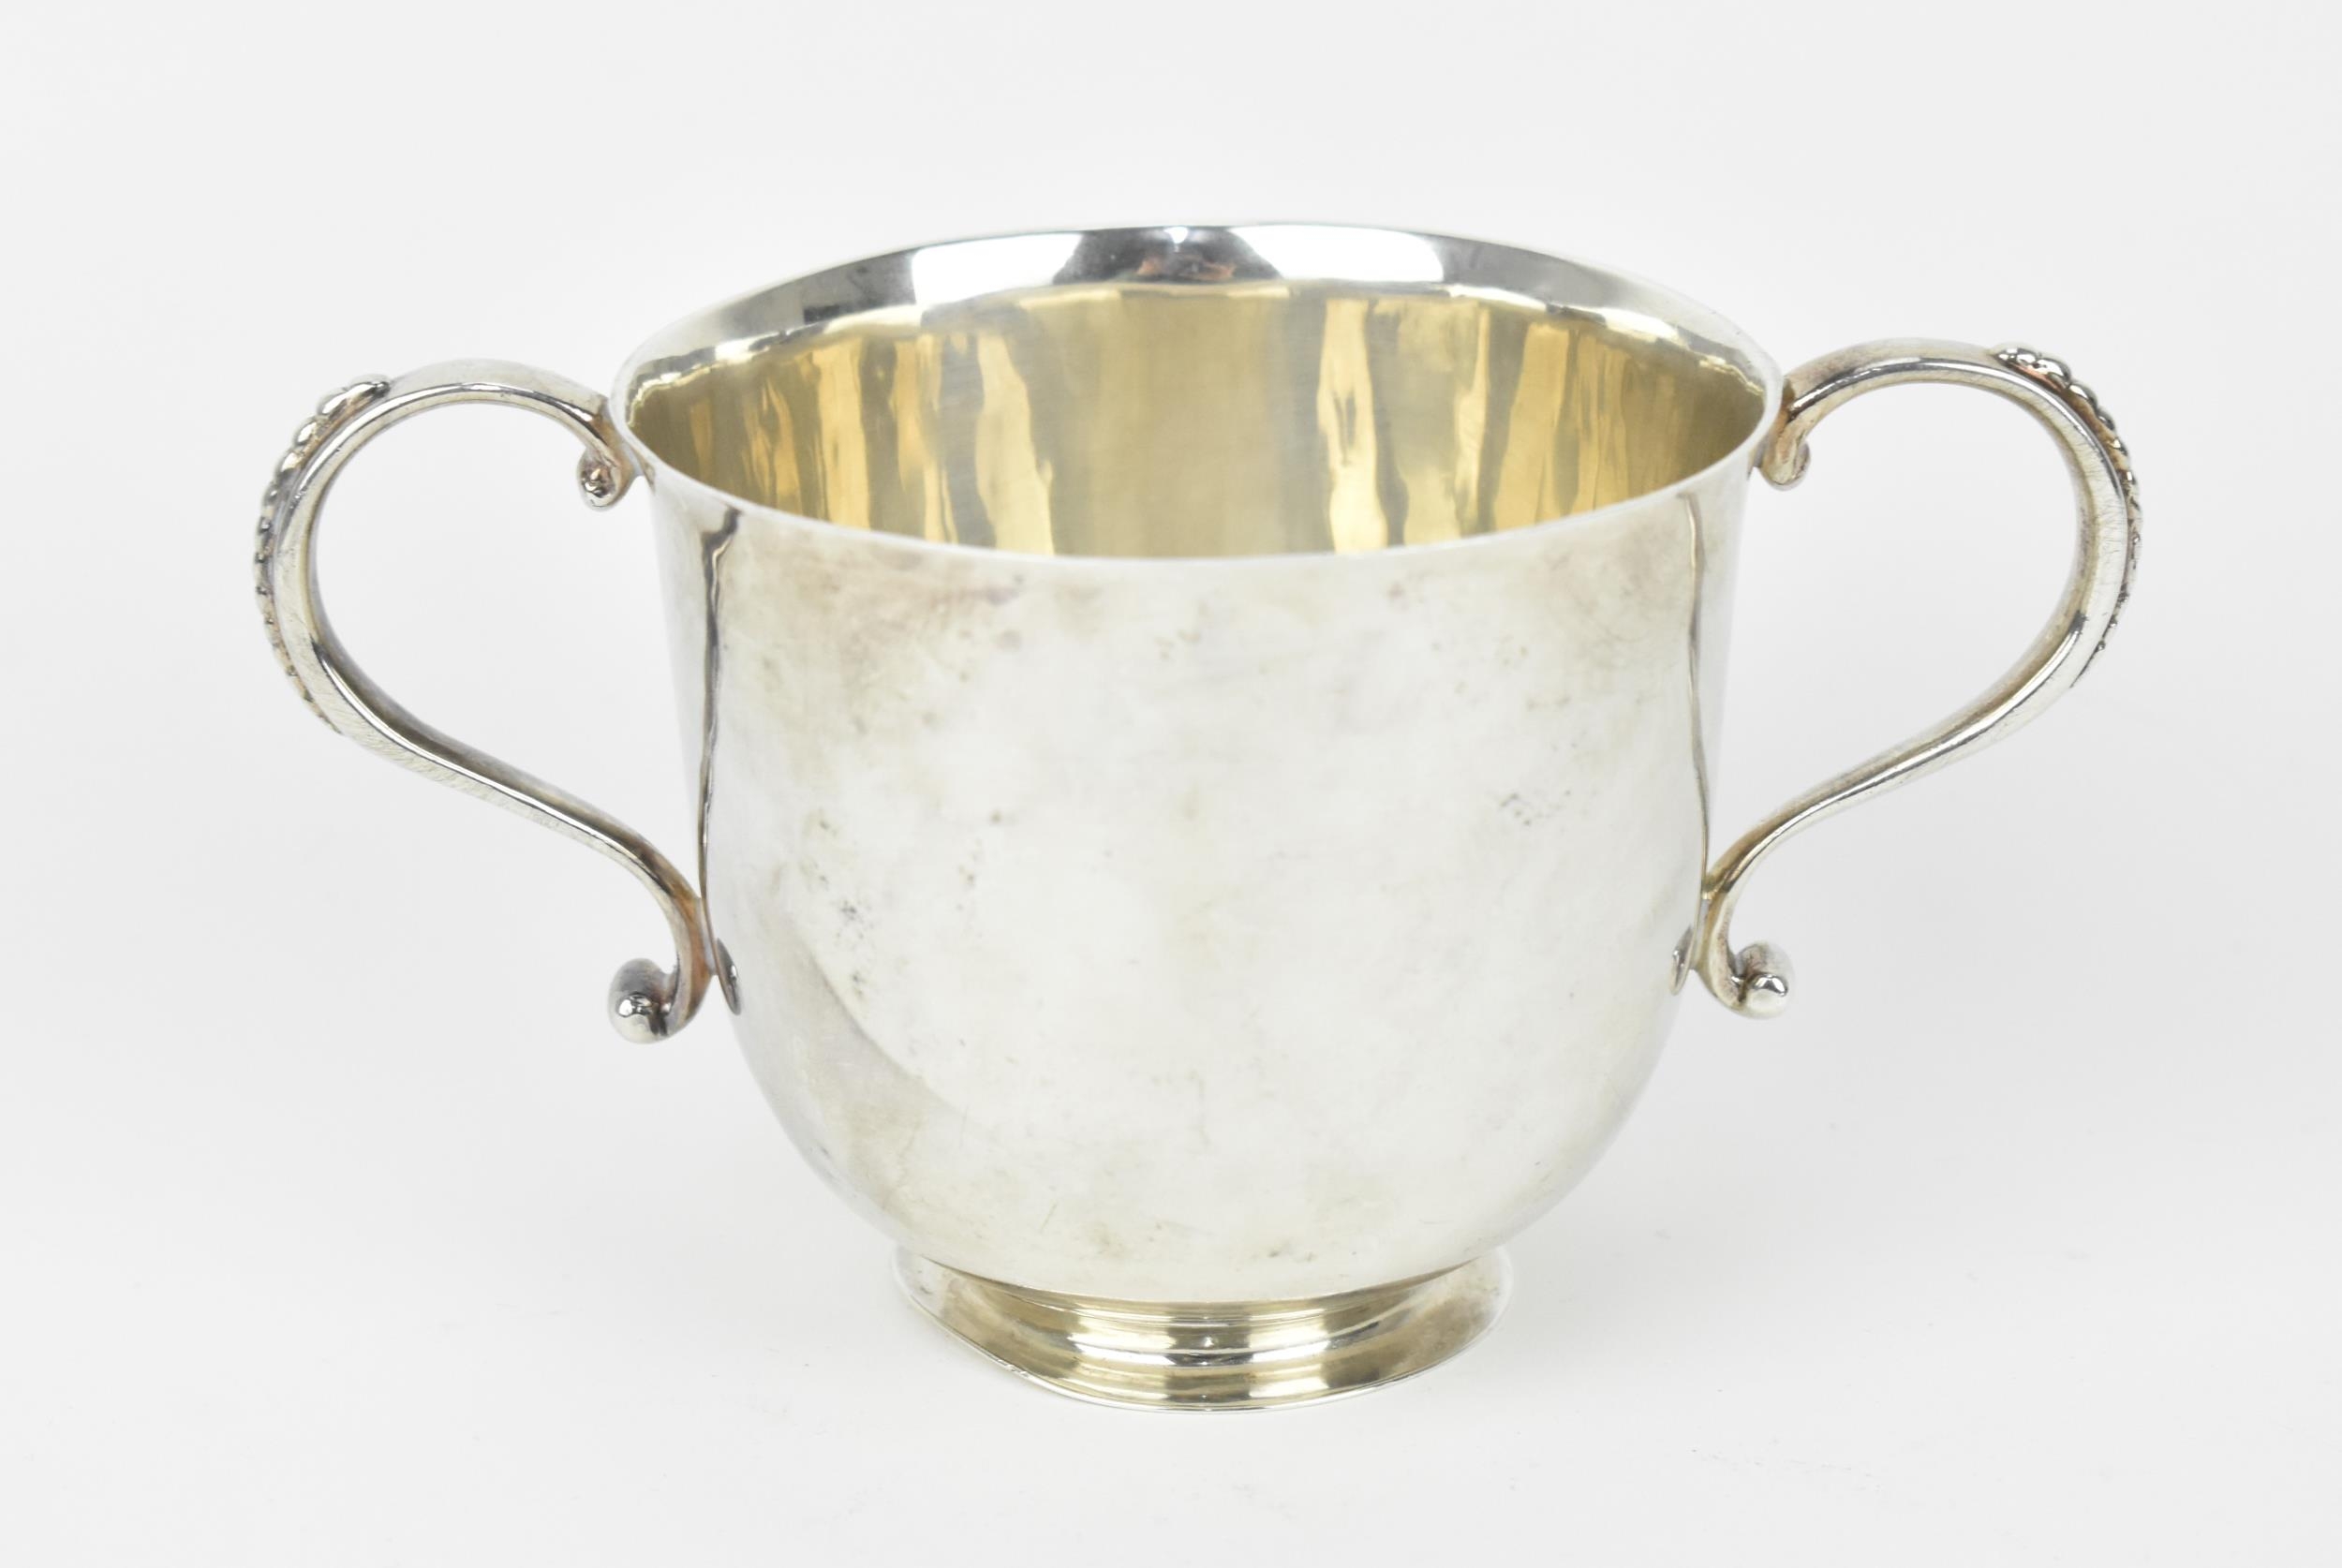 An Edwardian silver porringer by William Comyns, with Britannia hallmark and date letter M for 1907,